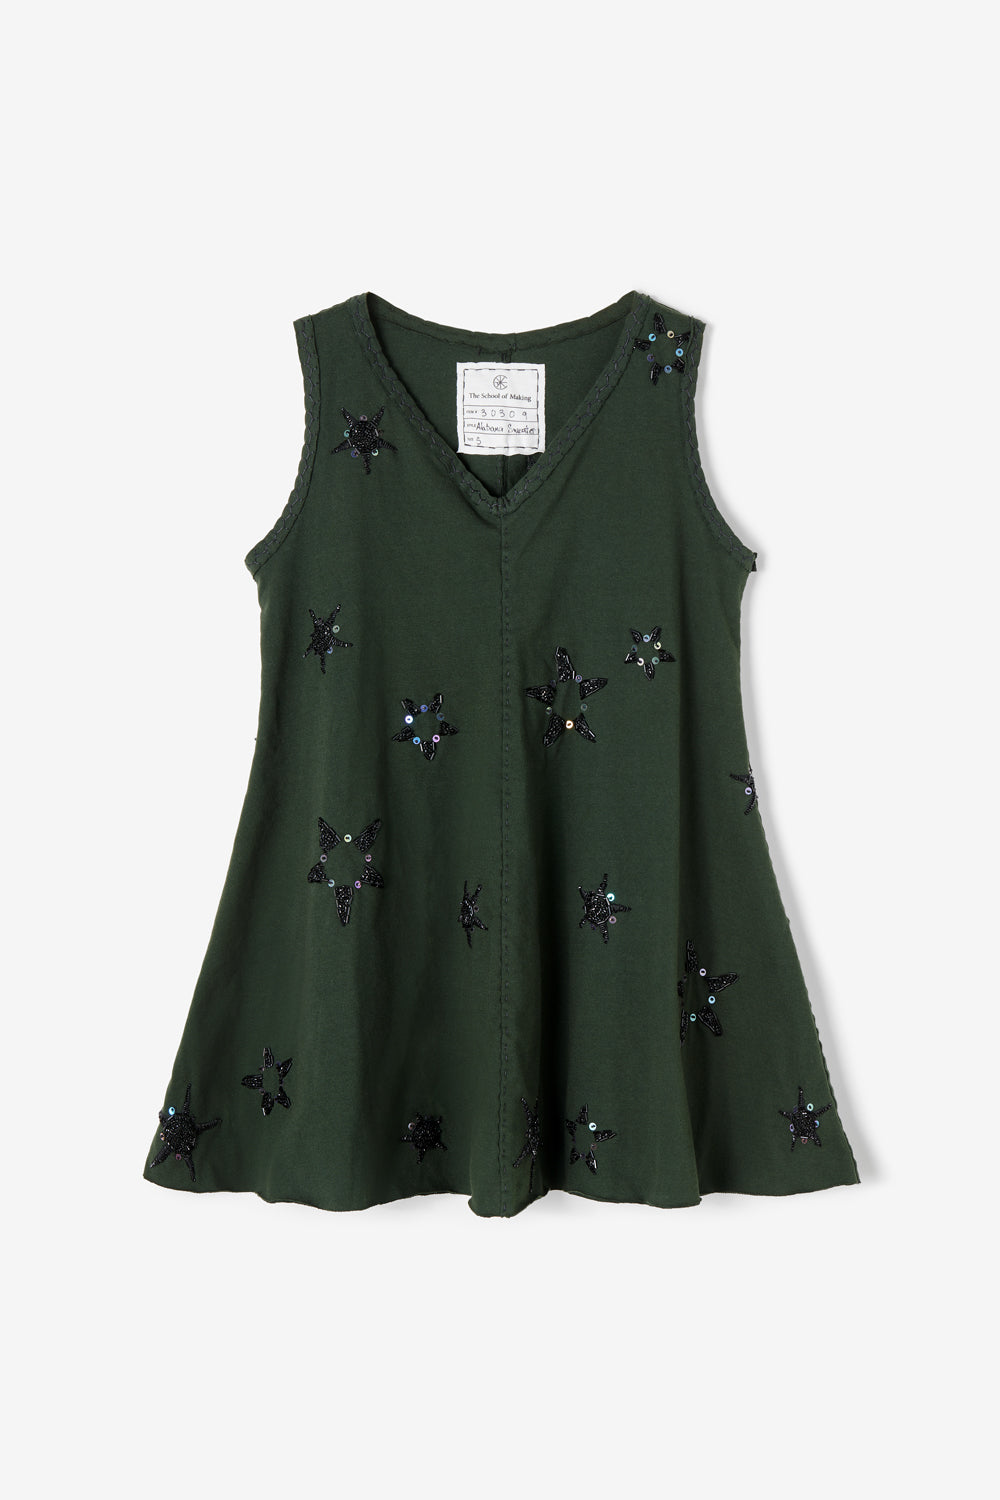 The Sleeveless Alabama Sweater Top in forest green with beaded stars.